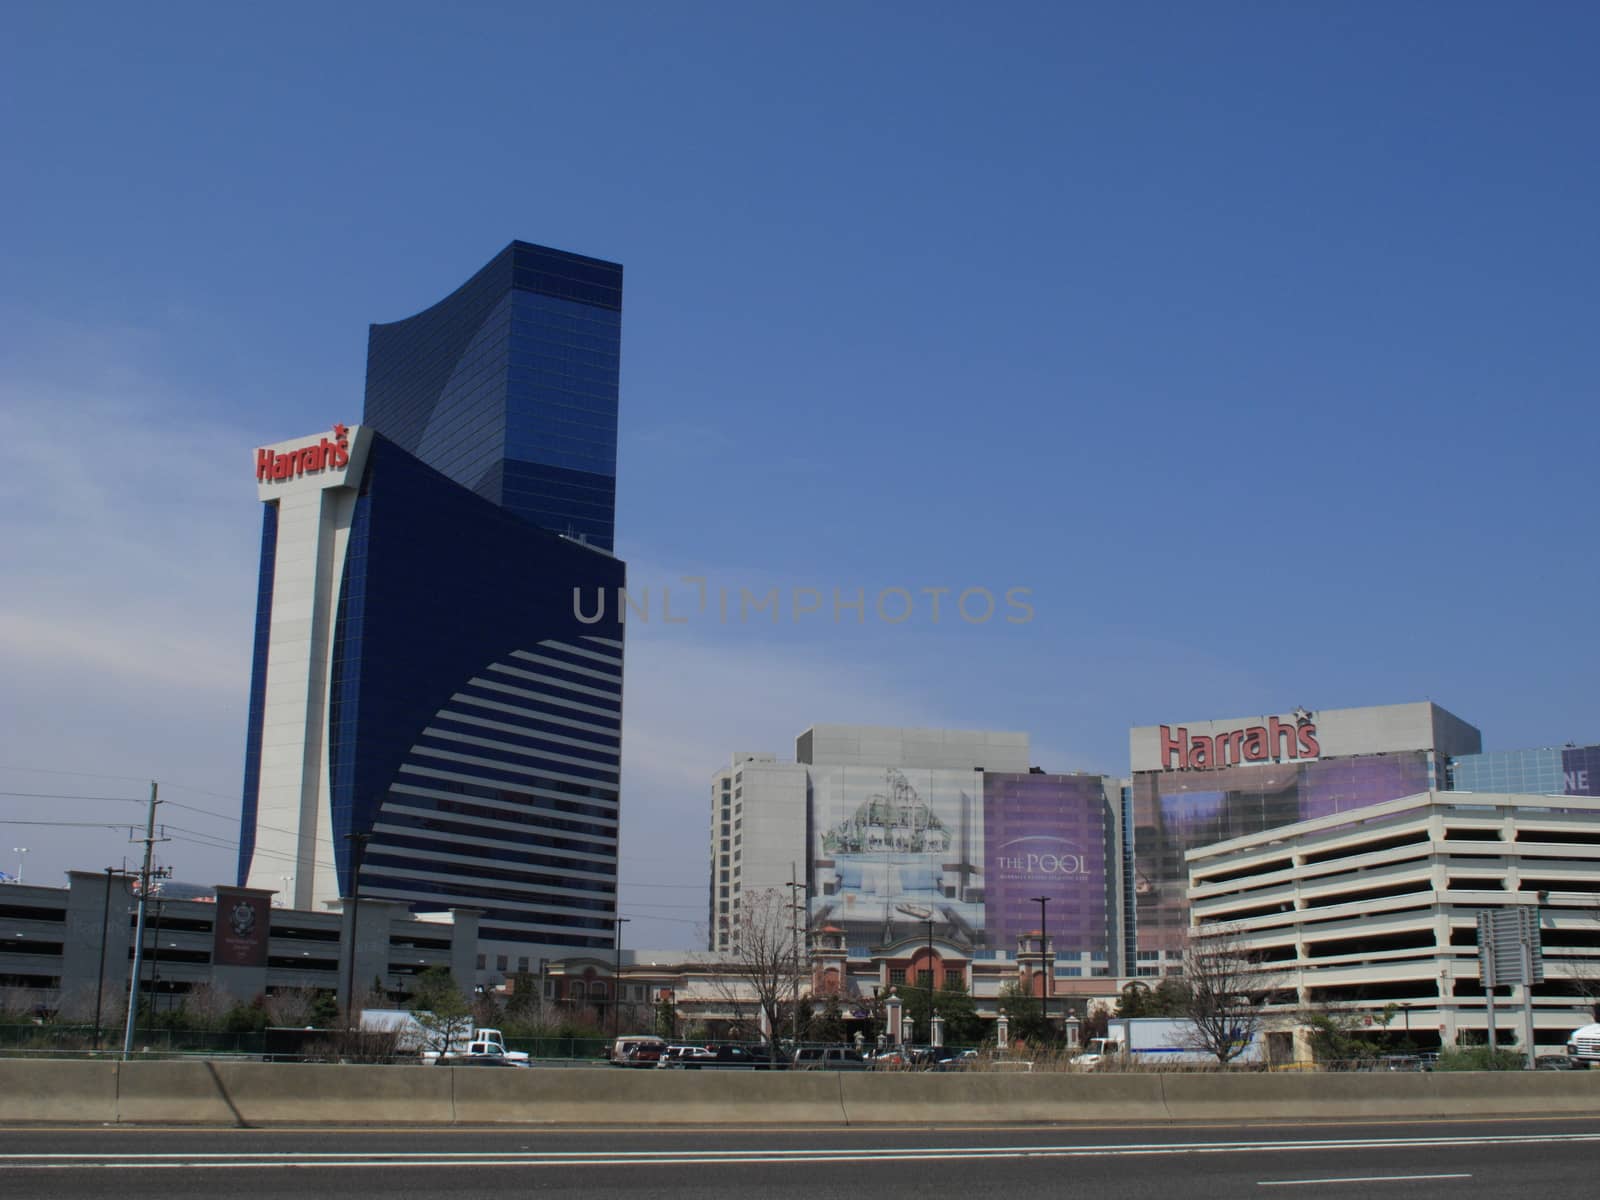 Harrah's Hotel in Atlantic City by Ffooter